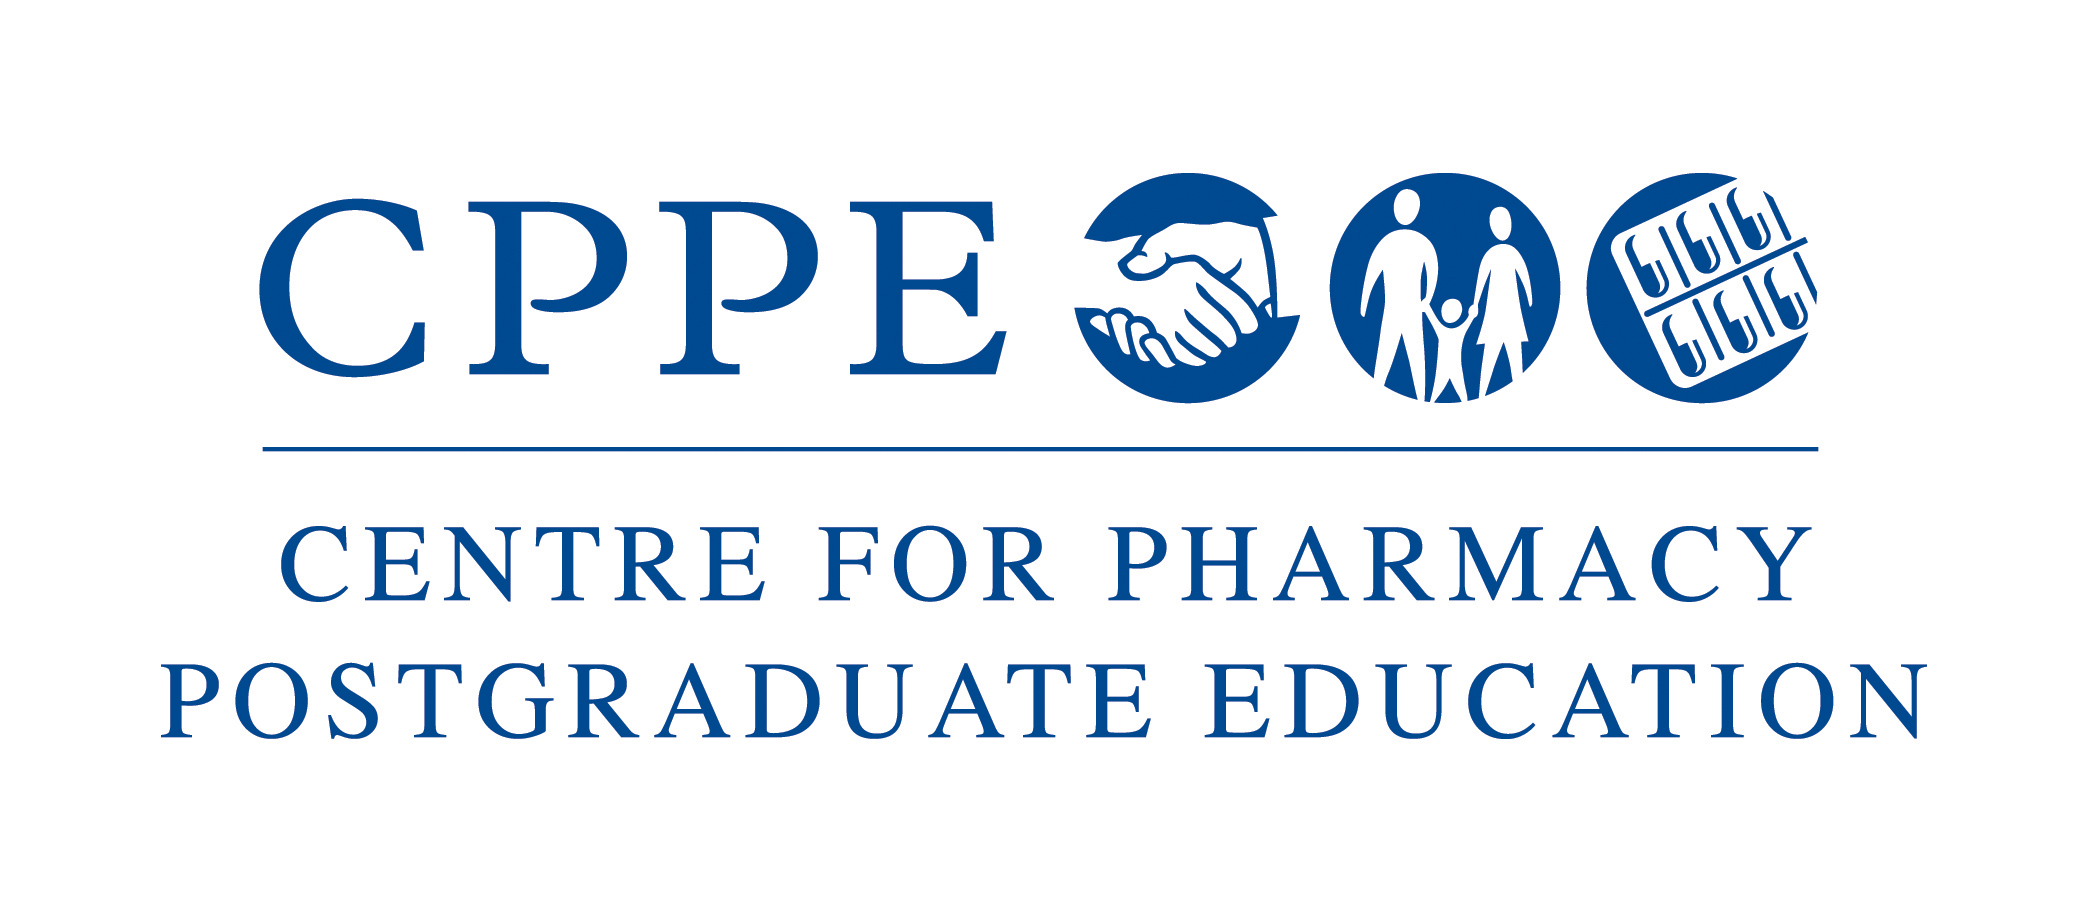 CPPE logo